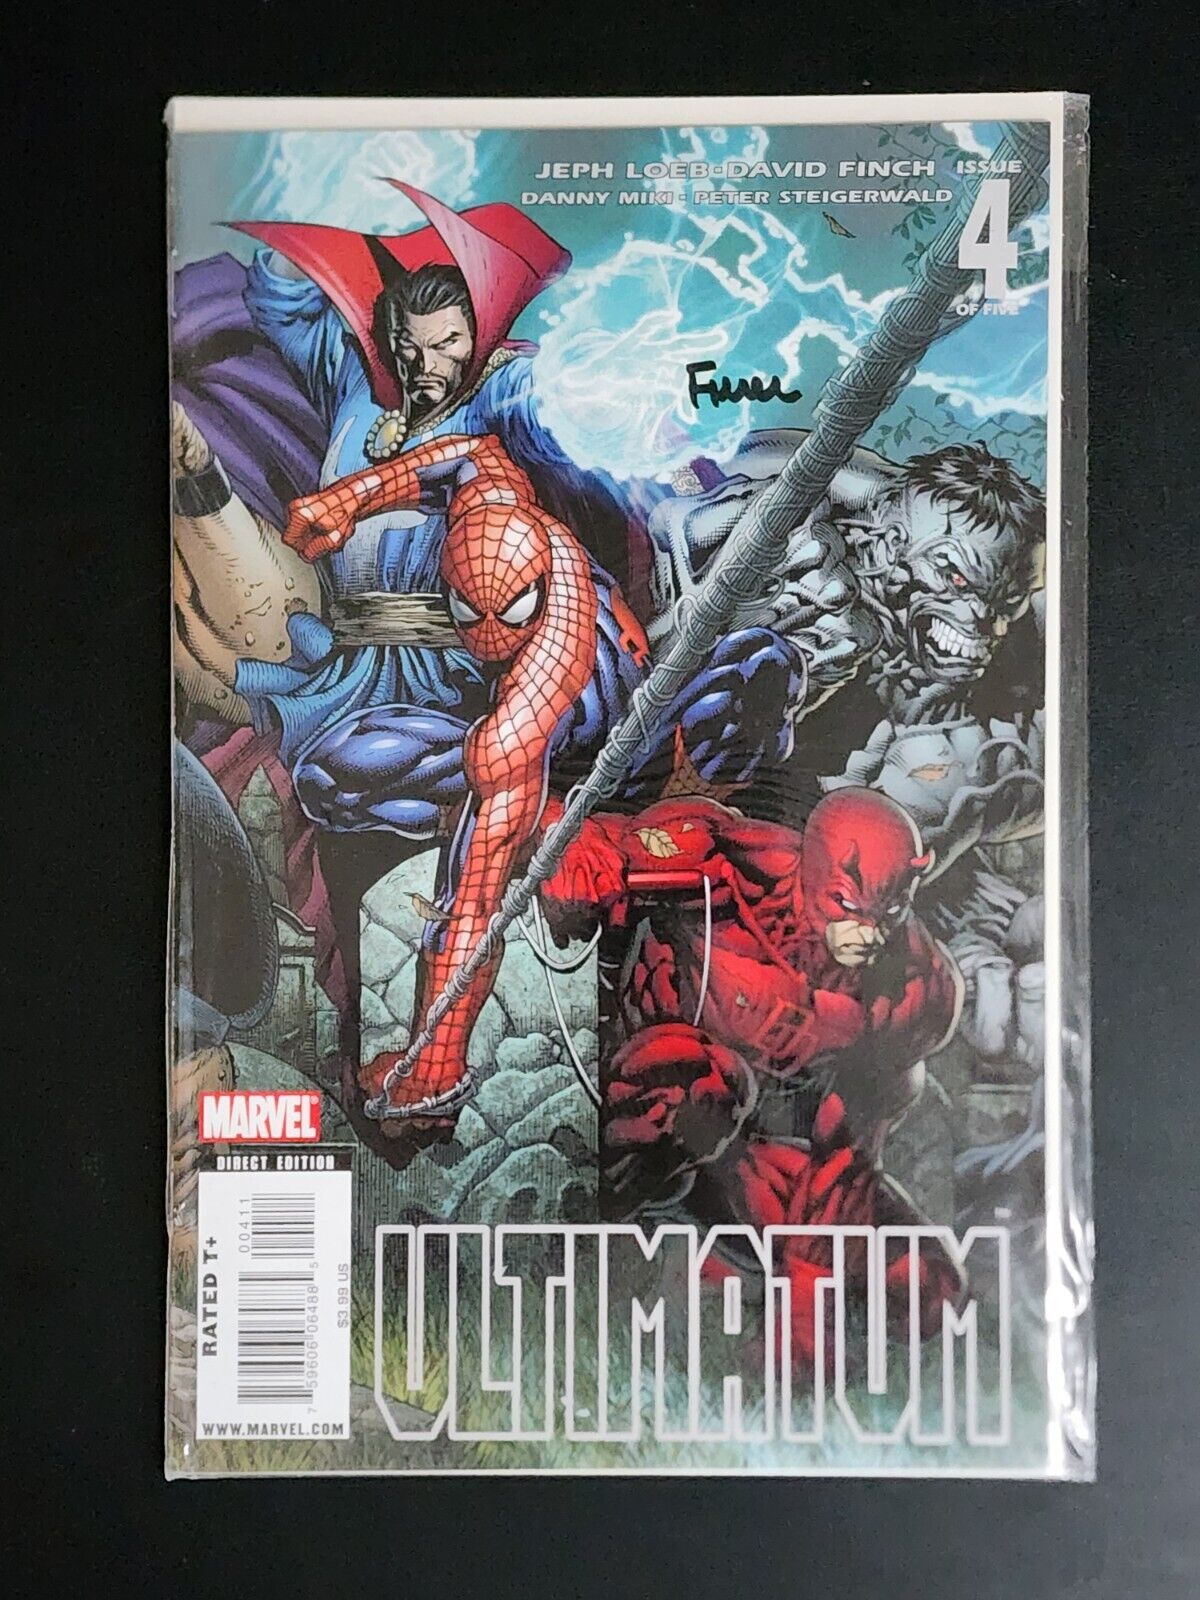 Marvel Comics Ultimatum #4 Signed by David Finch with COA